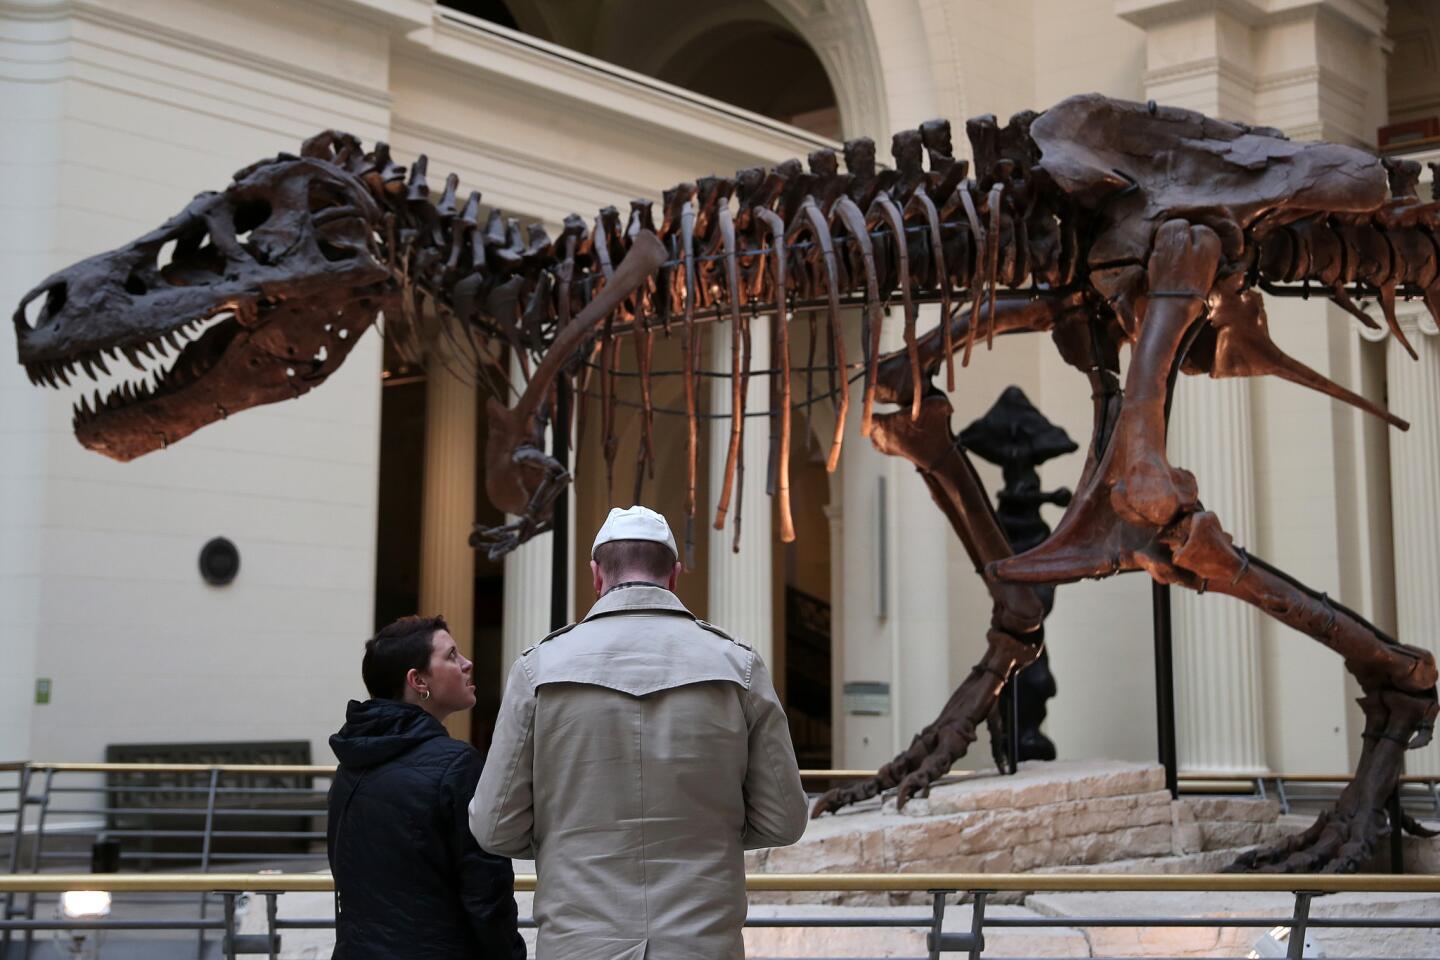 Children ages 6 to 12 can bring their sleeping bags and wander around the museum, participate in workshops, and hear bedtime stories underneath Sue, the T-Rex. Cost is $60 per person. Read more about it here.